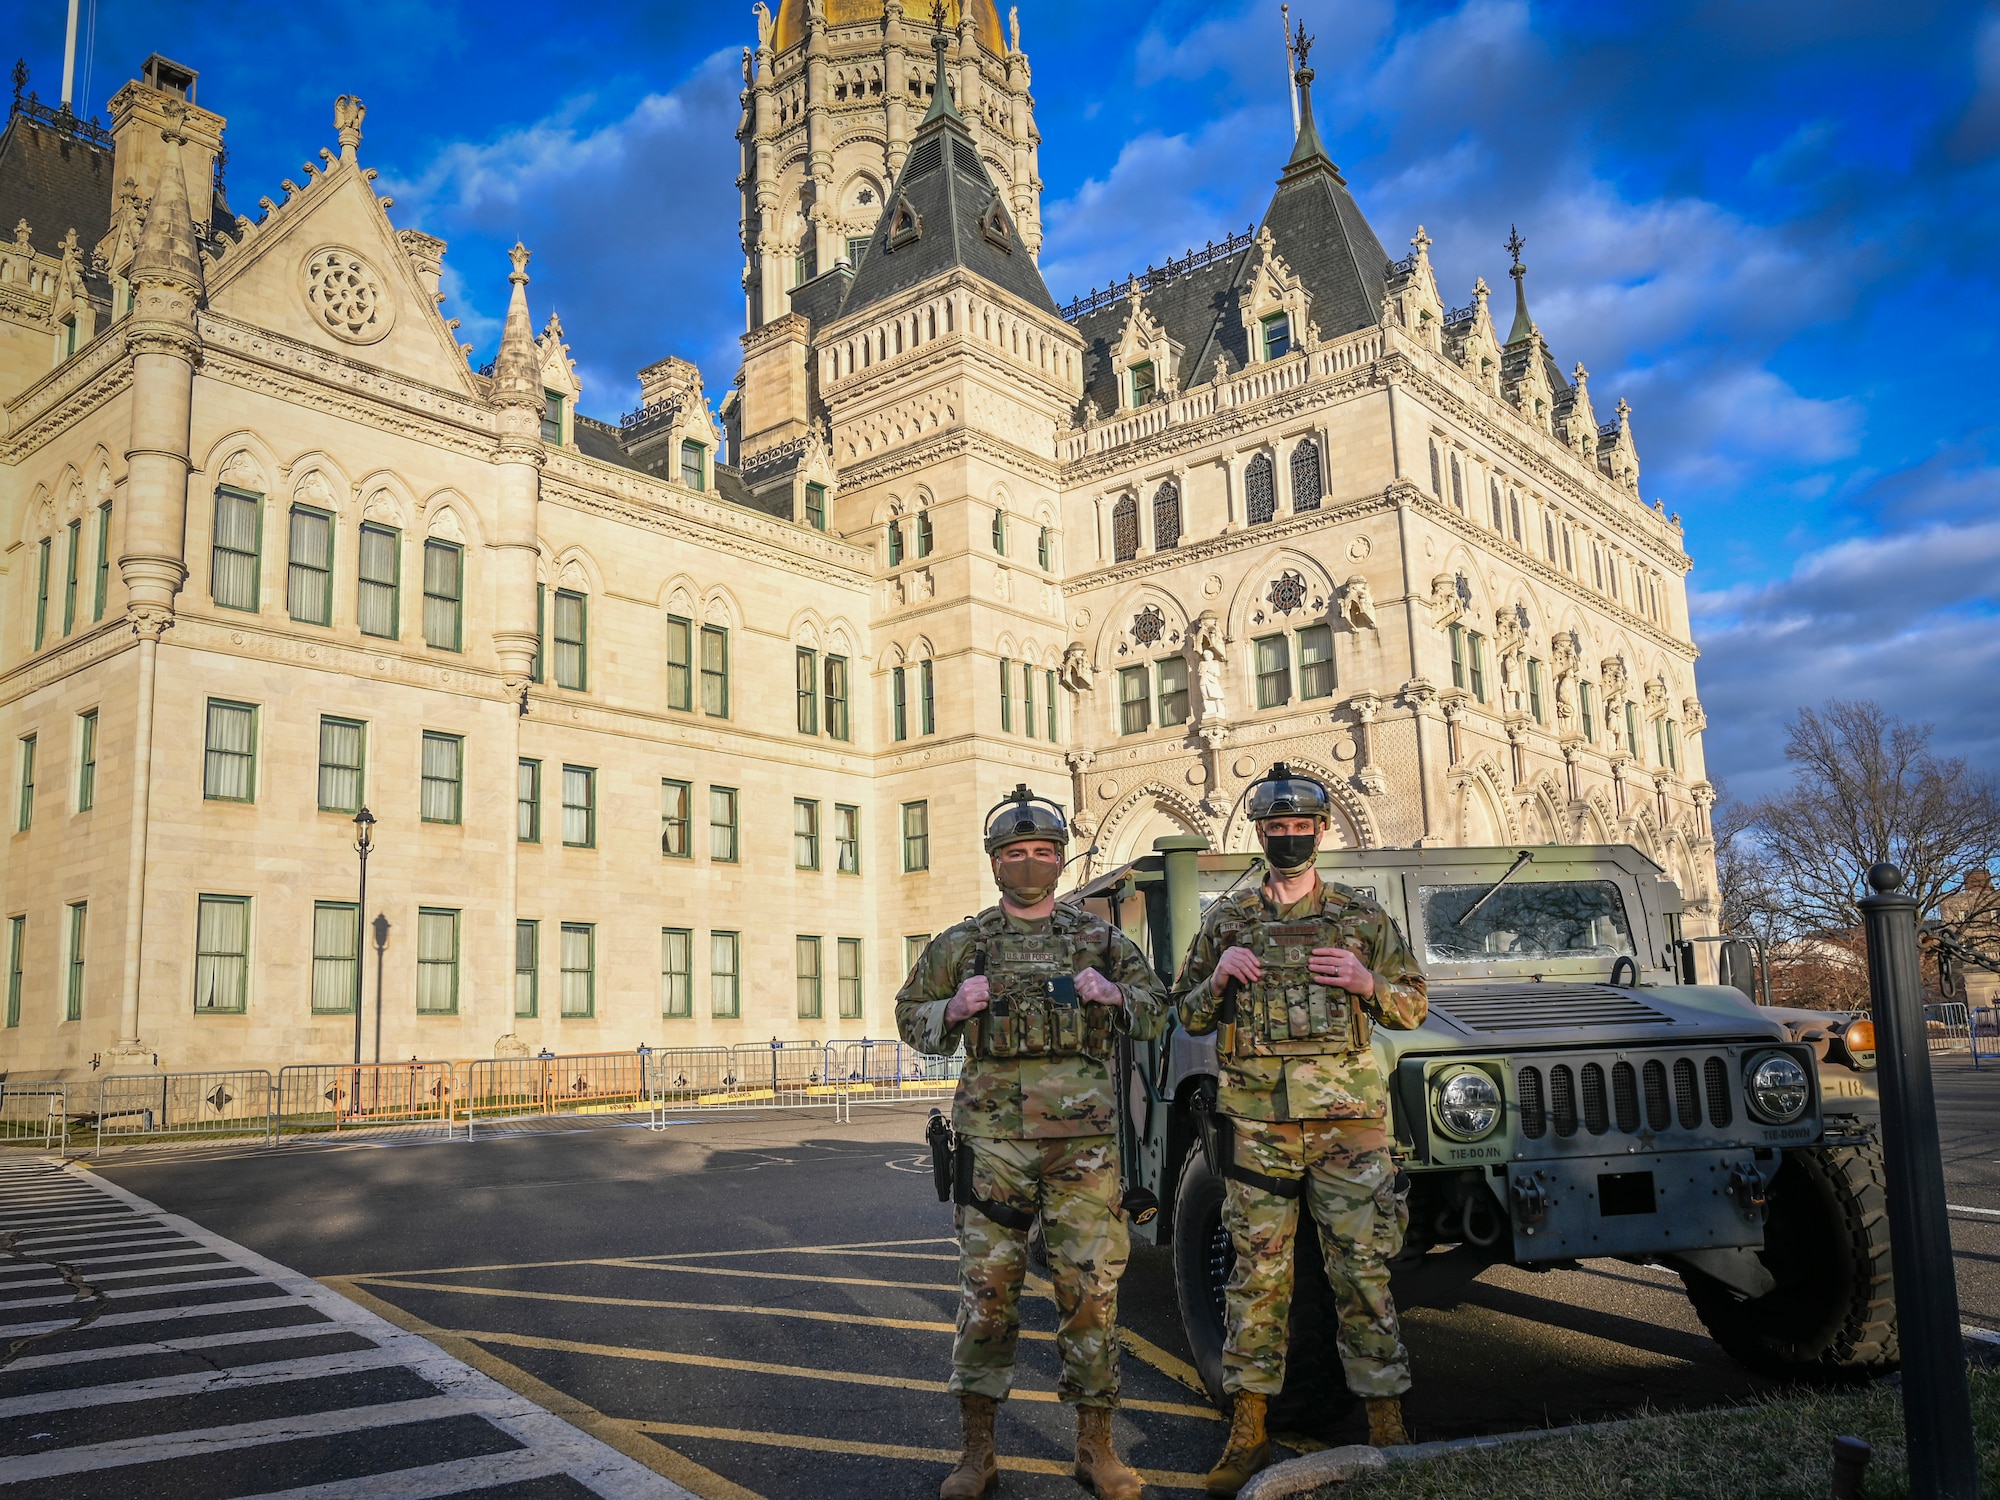 Connecticut Air National Guard Security Forces Airmen provide security support at the Connecticut State Capitol in Hartford, Connecticut, Jan. 17, 2021. The Connecticut National Guard provided additional security for critical infrastructure in support of local and state law enforcement ahead of the 59th Presidential Inauguration. (U.S. Air National Guard photo by Staff Sgt. Steven Tucker)